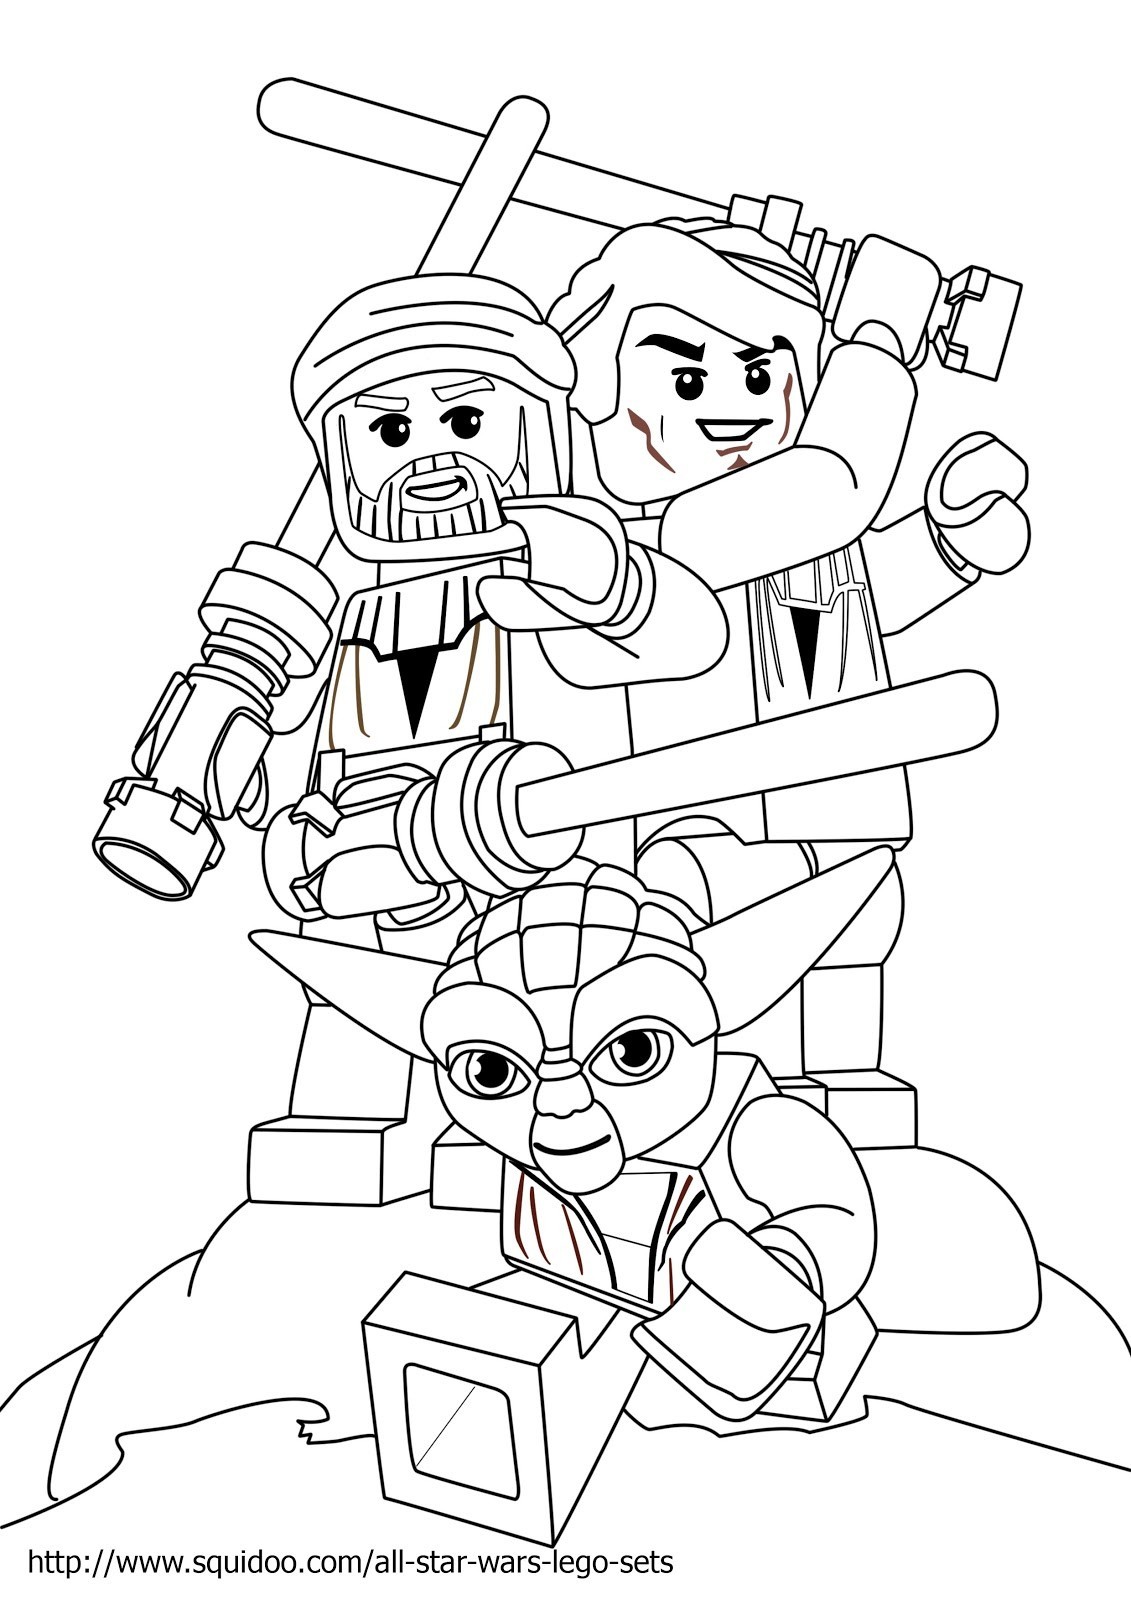 Best of lego princess coloring pages Gallery 10 m Generic Princess Coloring Pages Best